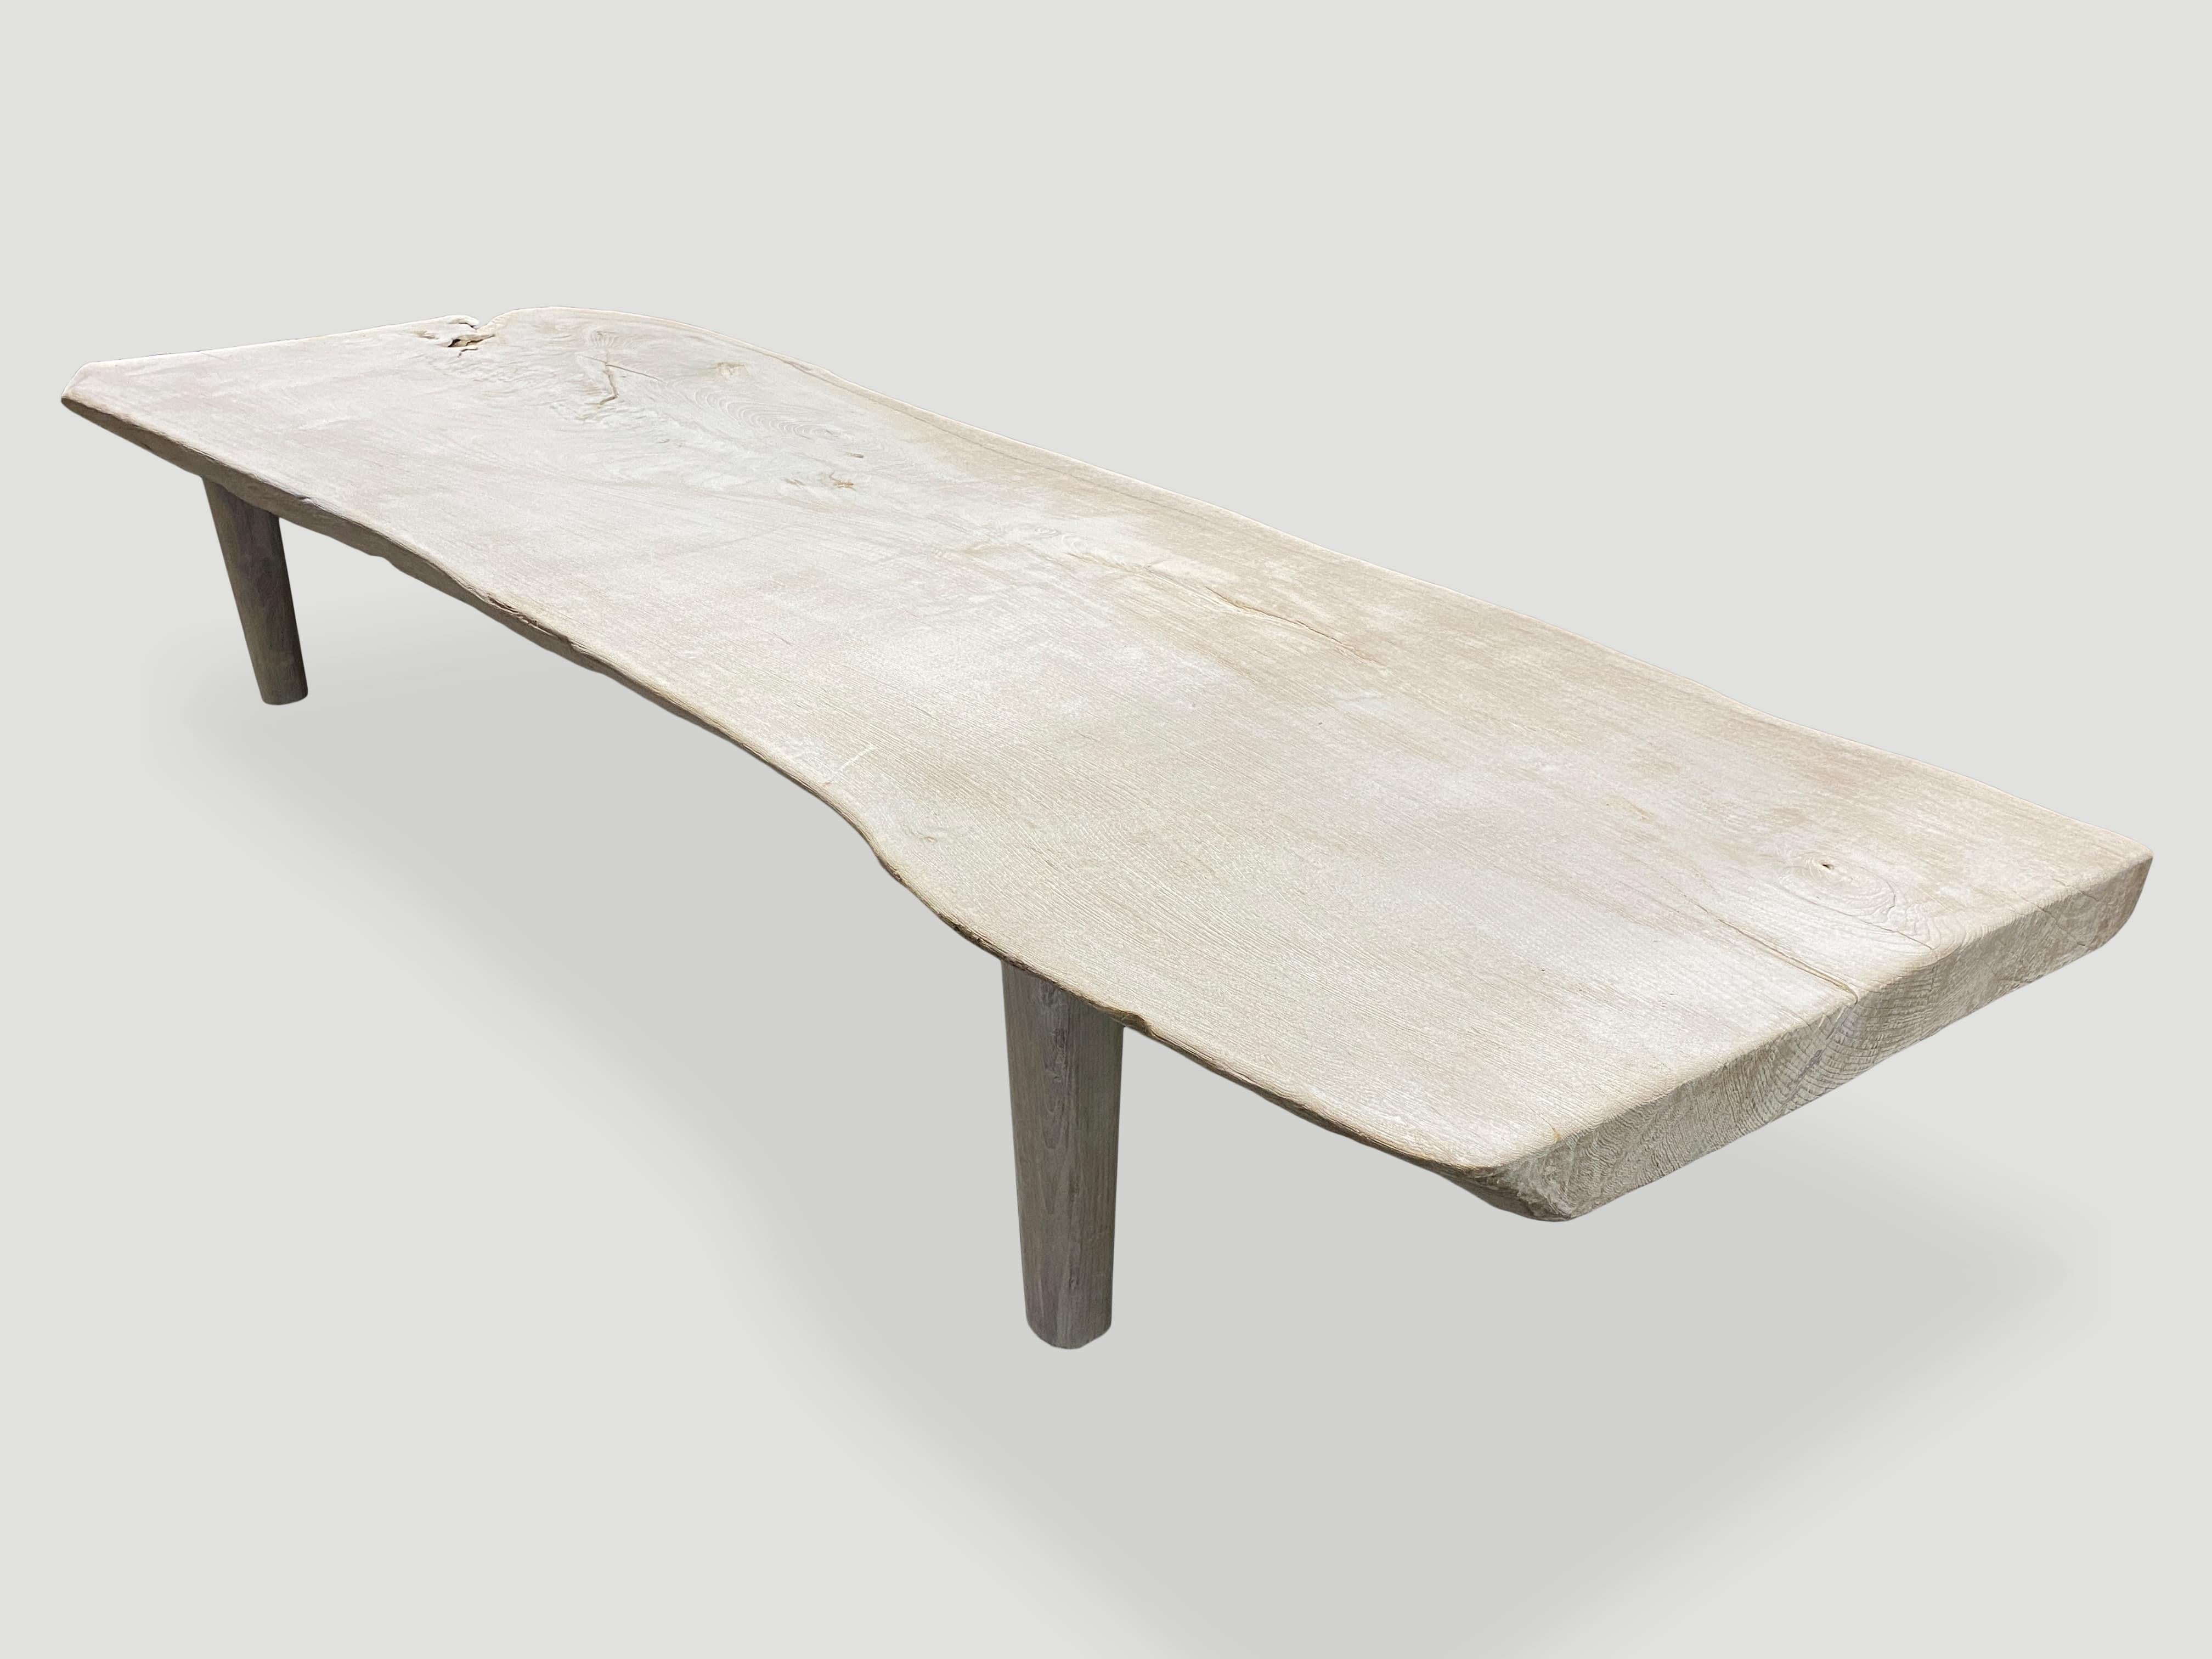 Impressive single slab, live edge bleached teak coffee table or bench with natural erosion. We have added a light white wash finish revealing the beautiful grain on this reclaimed two and a half inch teak slab. Finally we added minimalist legs.